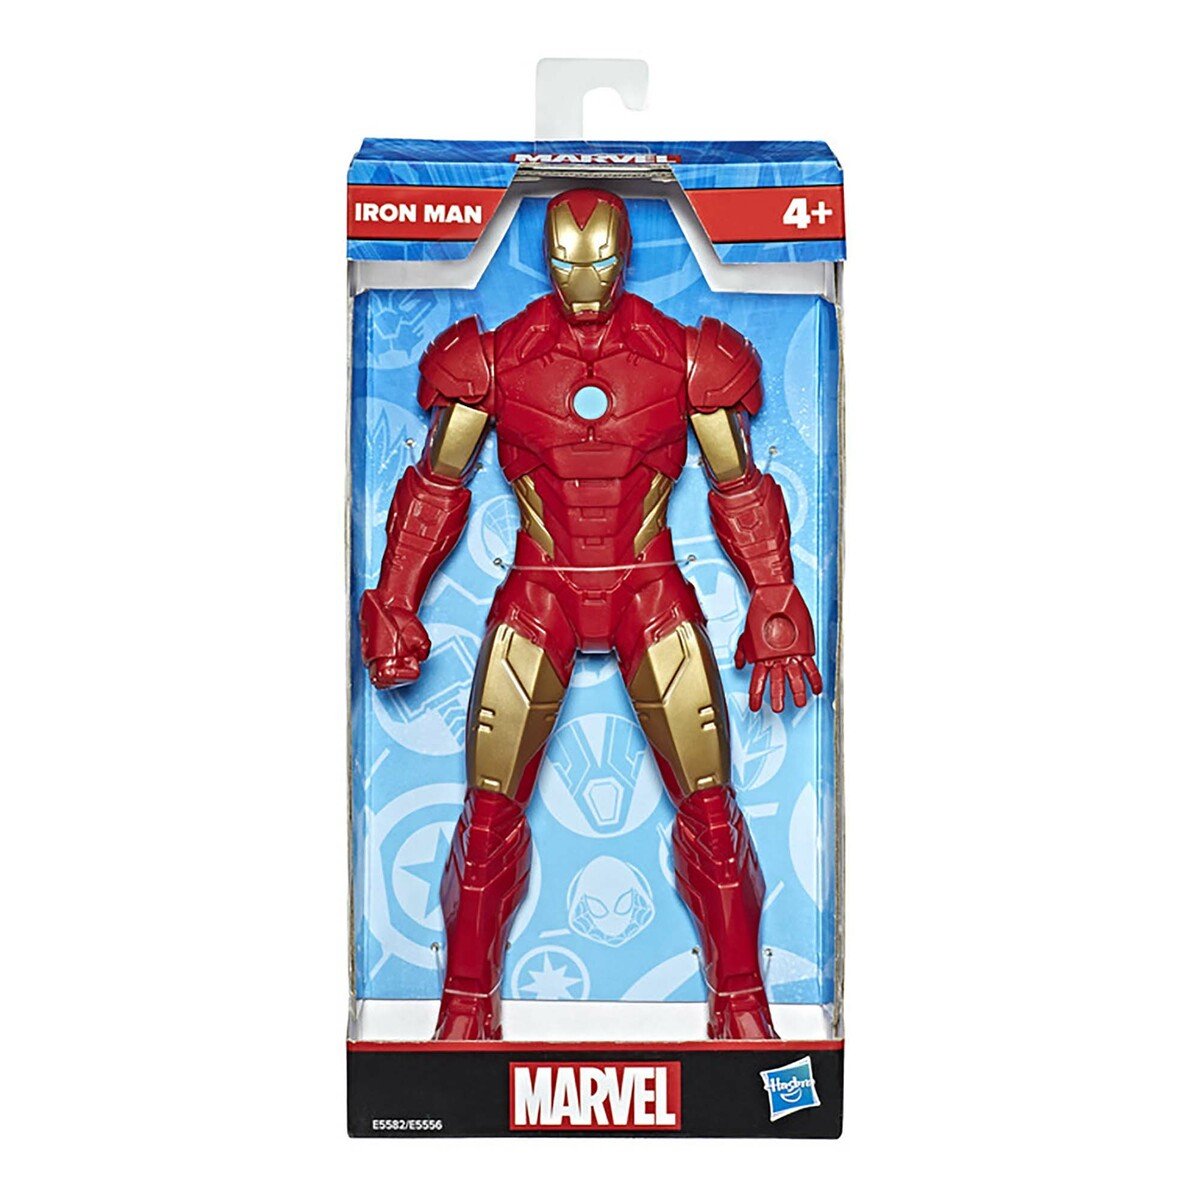 Marvel Iron Man Action Figure 9.5-Inch Scale E5582